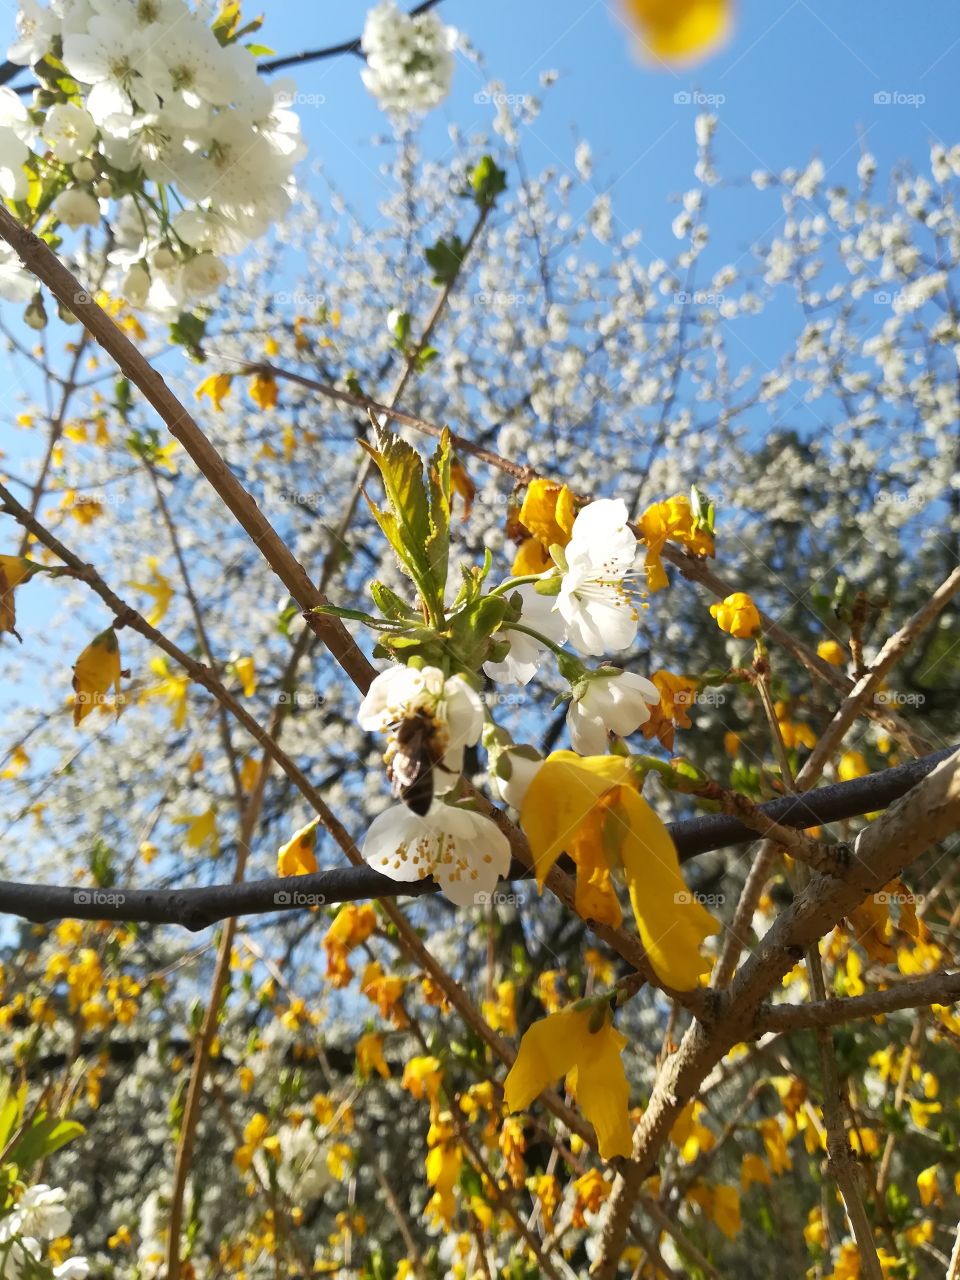 The sky is blue, forsythia is yellow